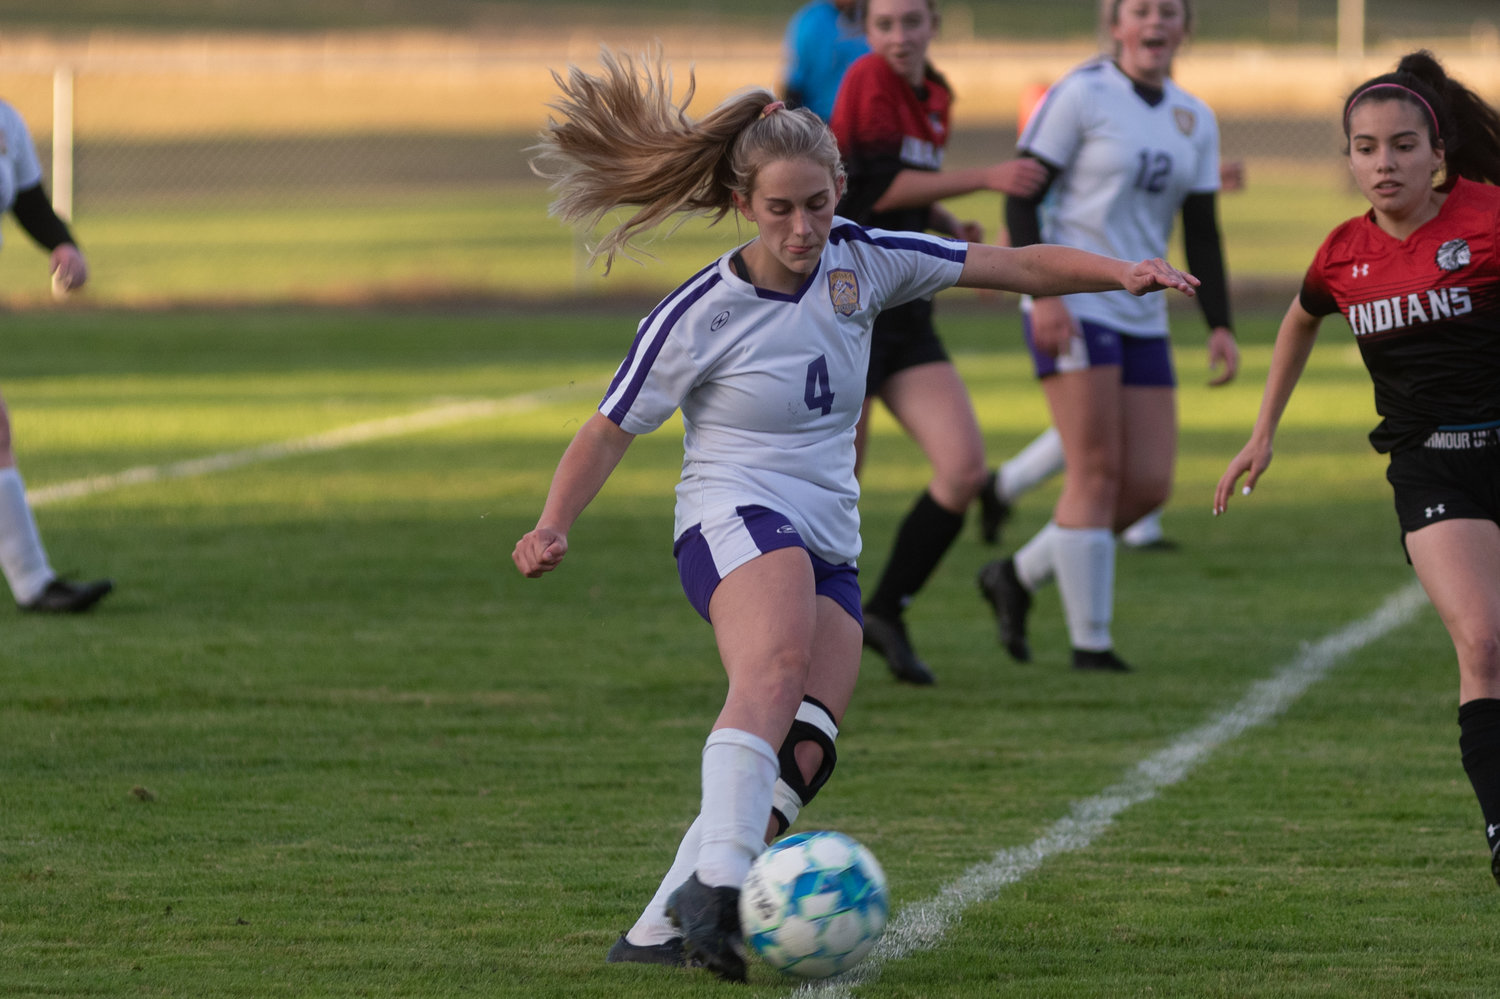 Onalaska's Jaycee Talley clears a ball in the Loggers 2-1 loss to Toledo Oct. 6.